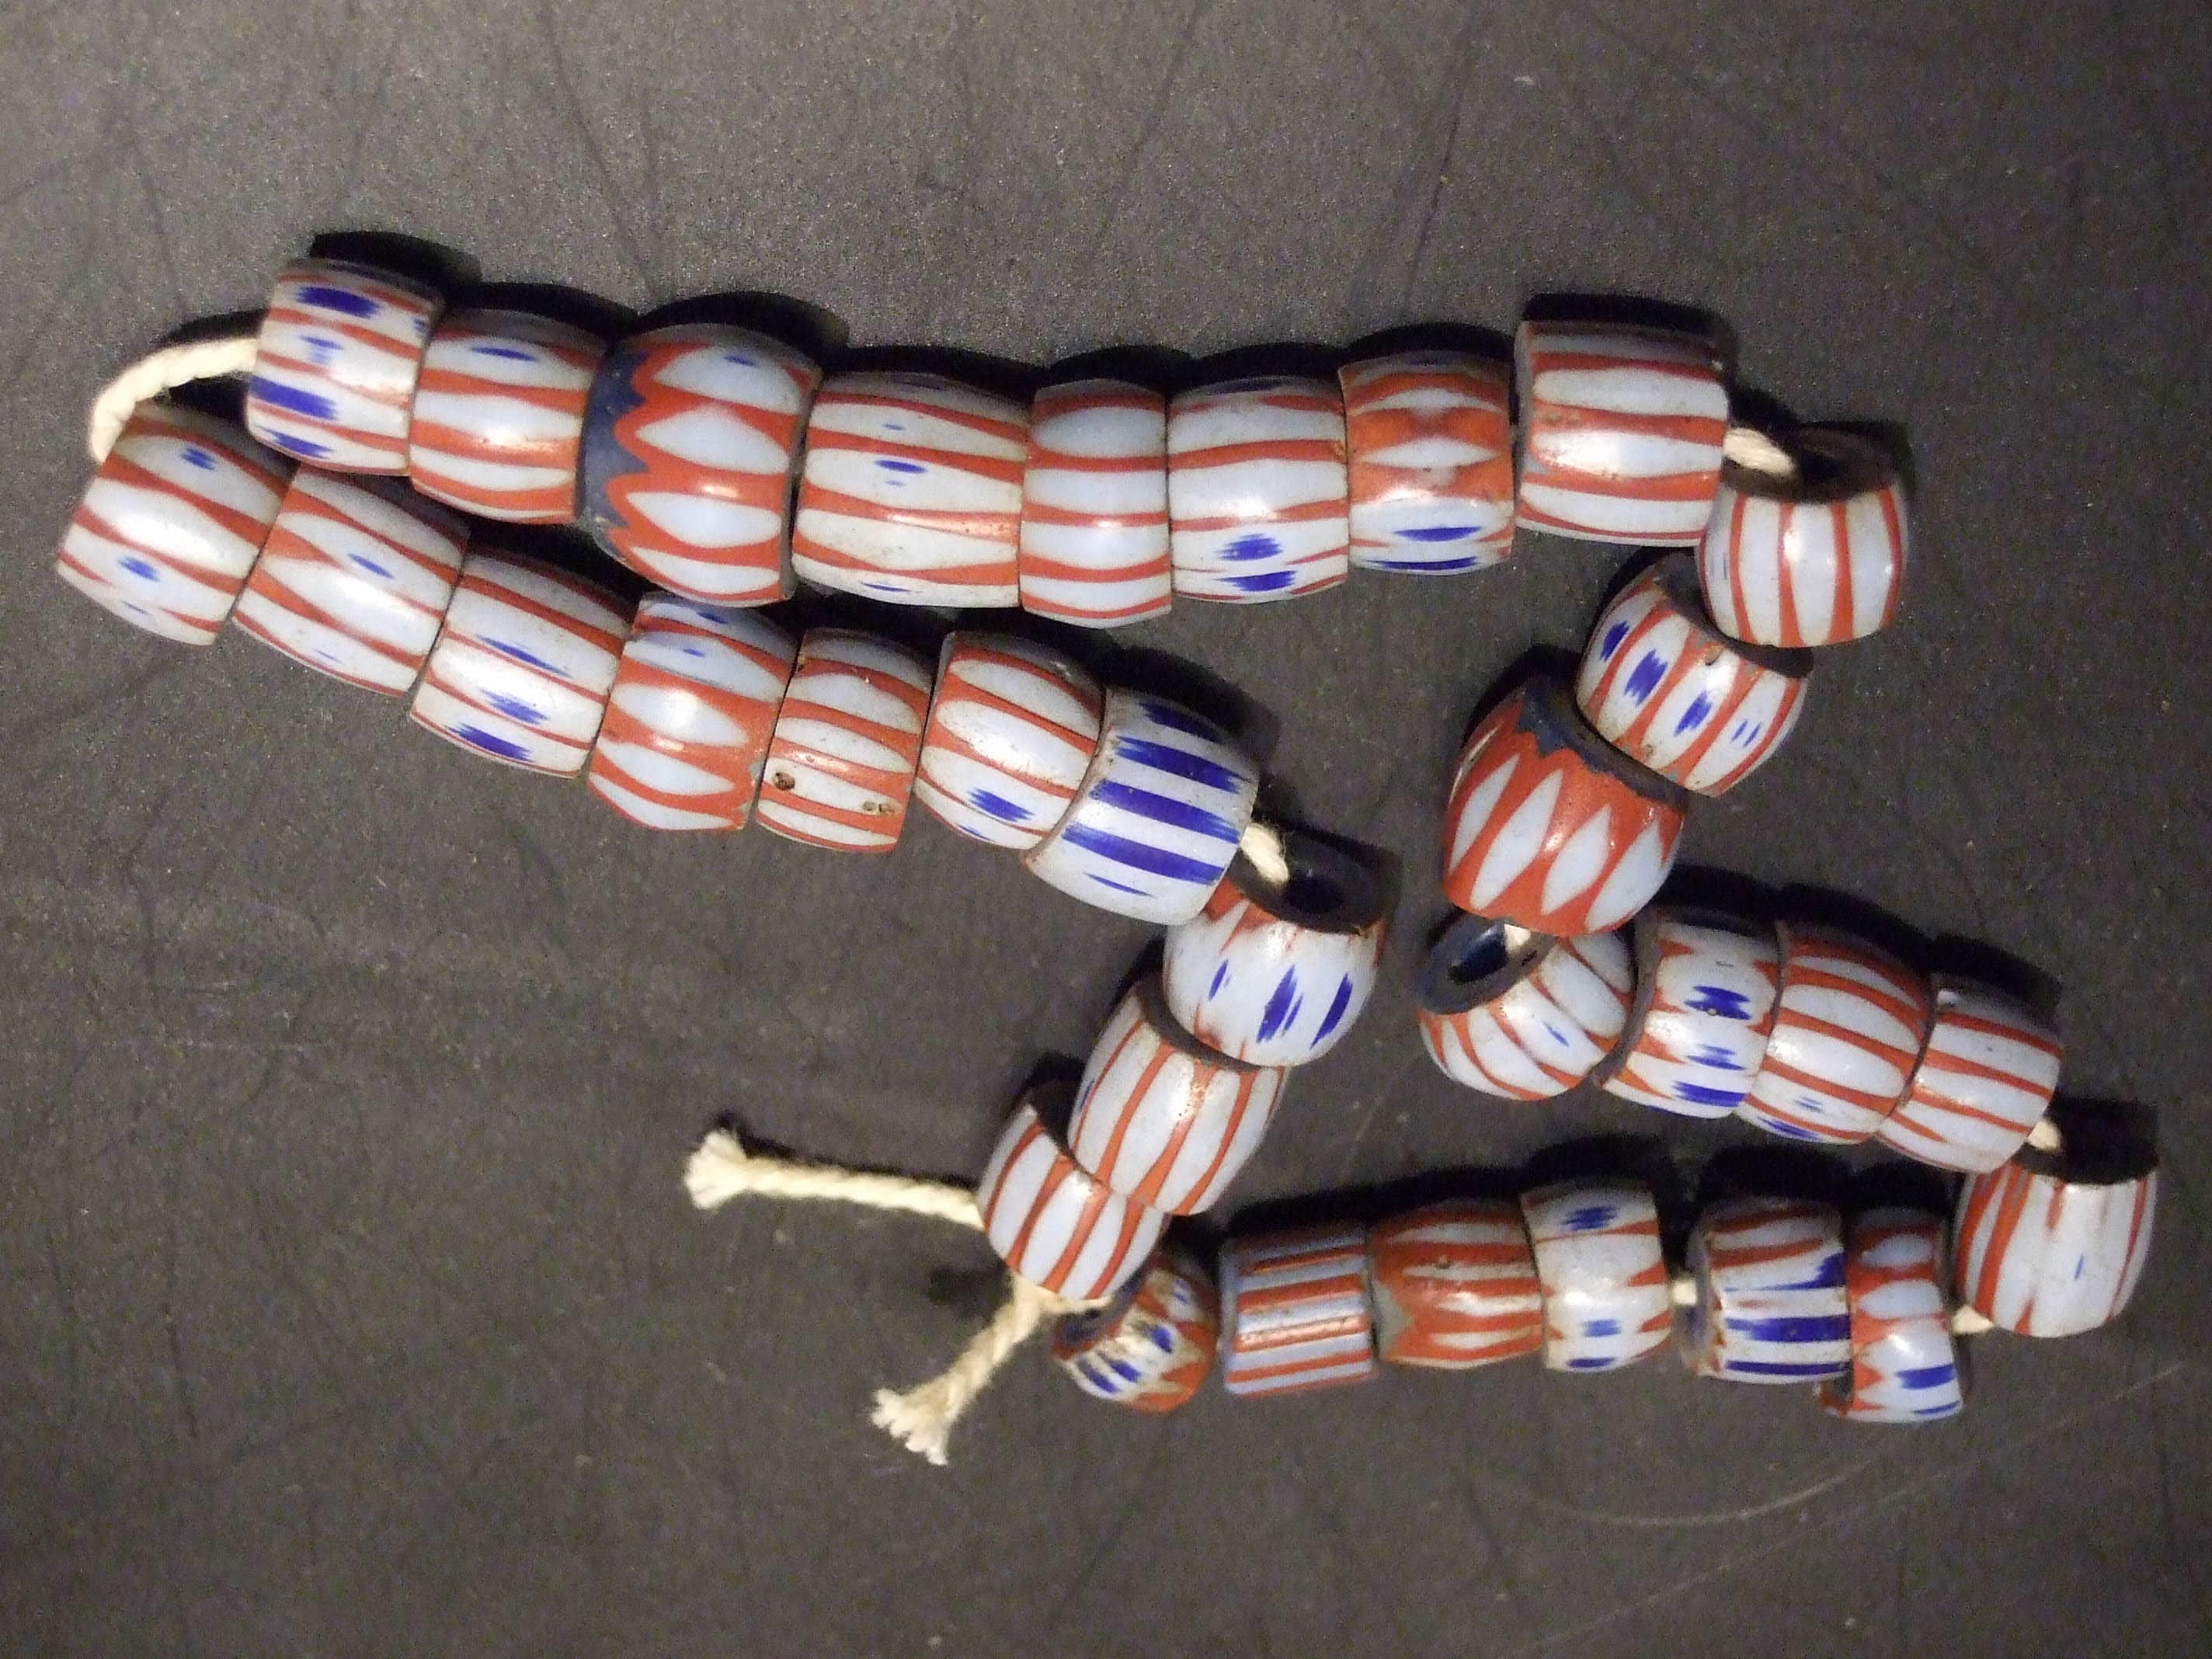 Awale Chevron Striped Beads CM80 Old Awale Chevron African Trade Beads Afrozip 